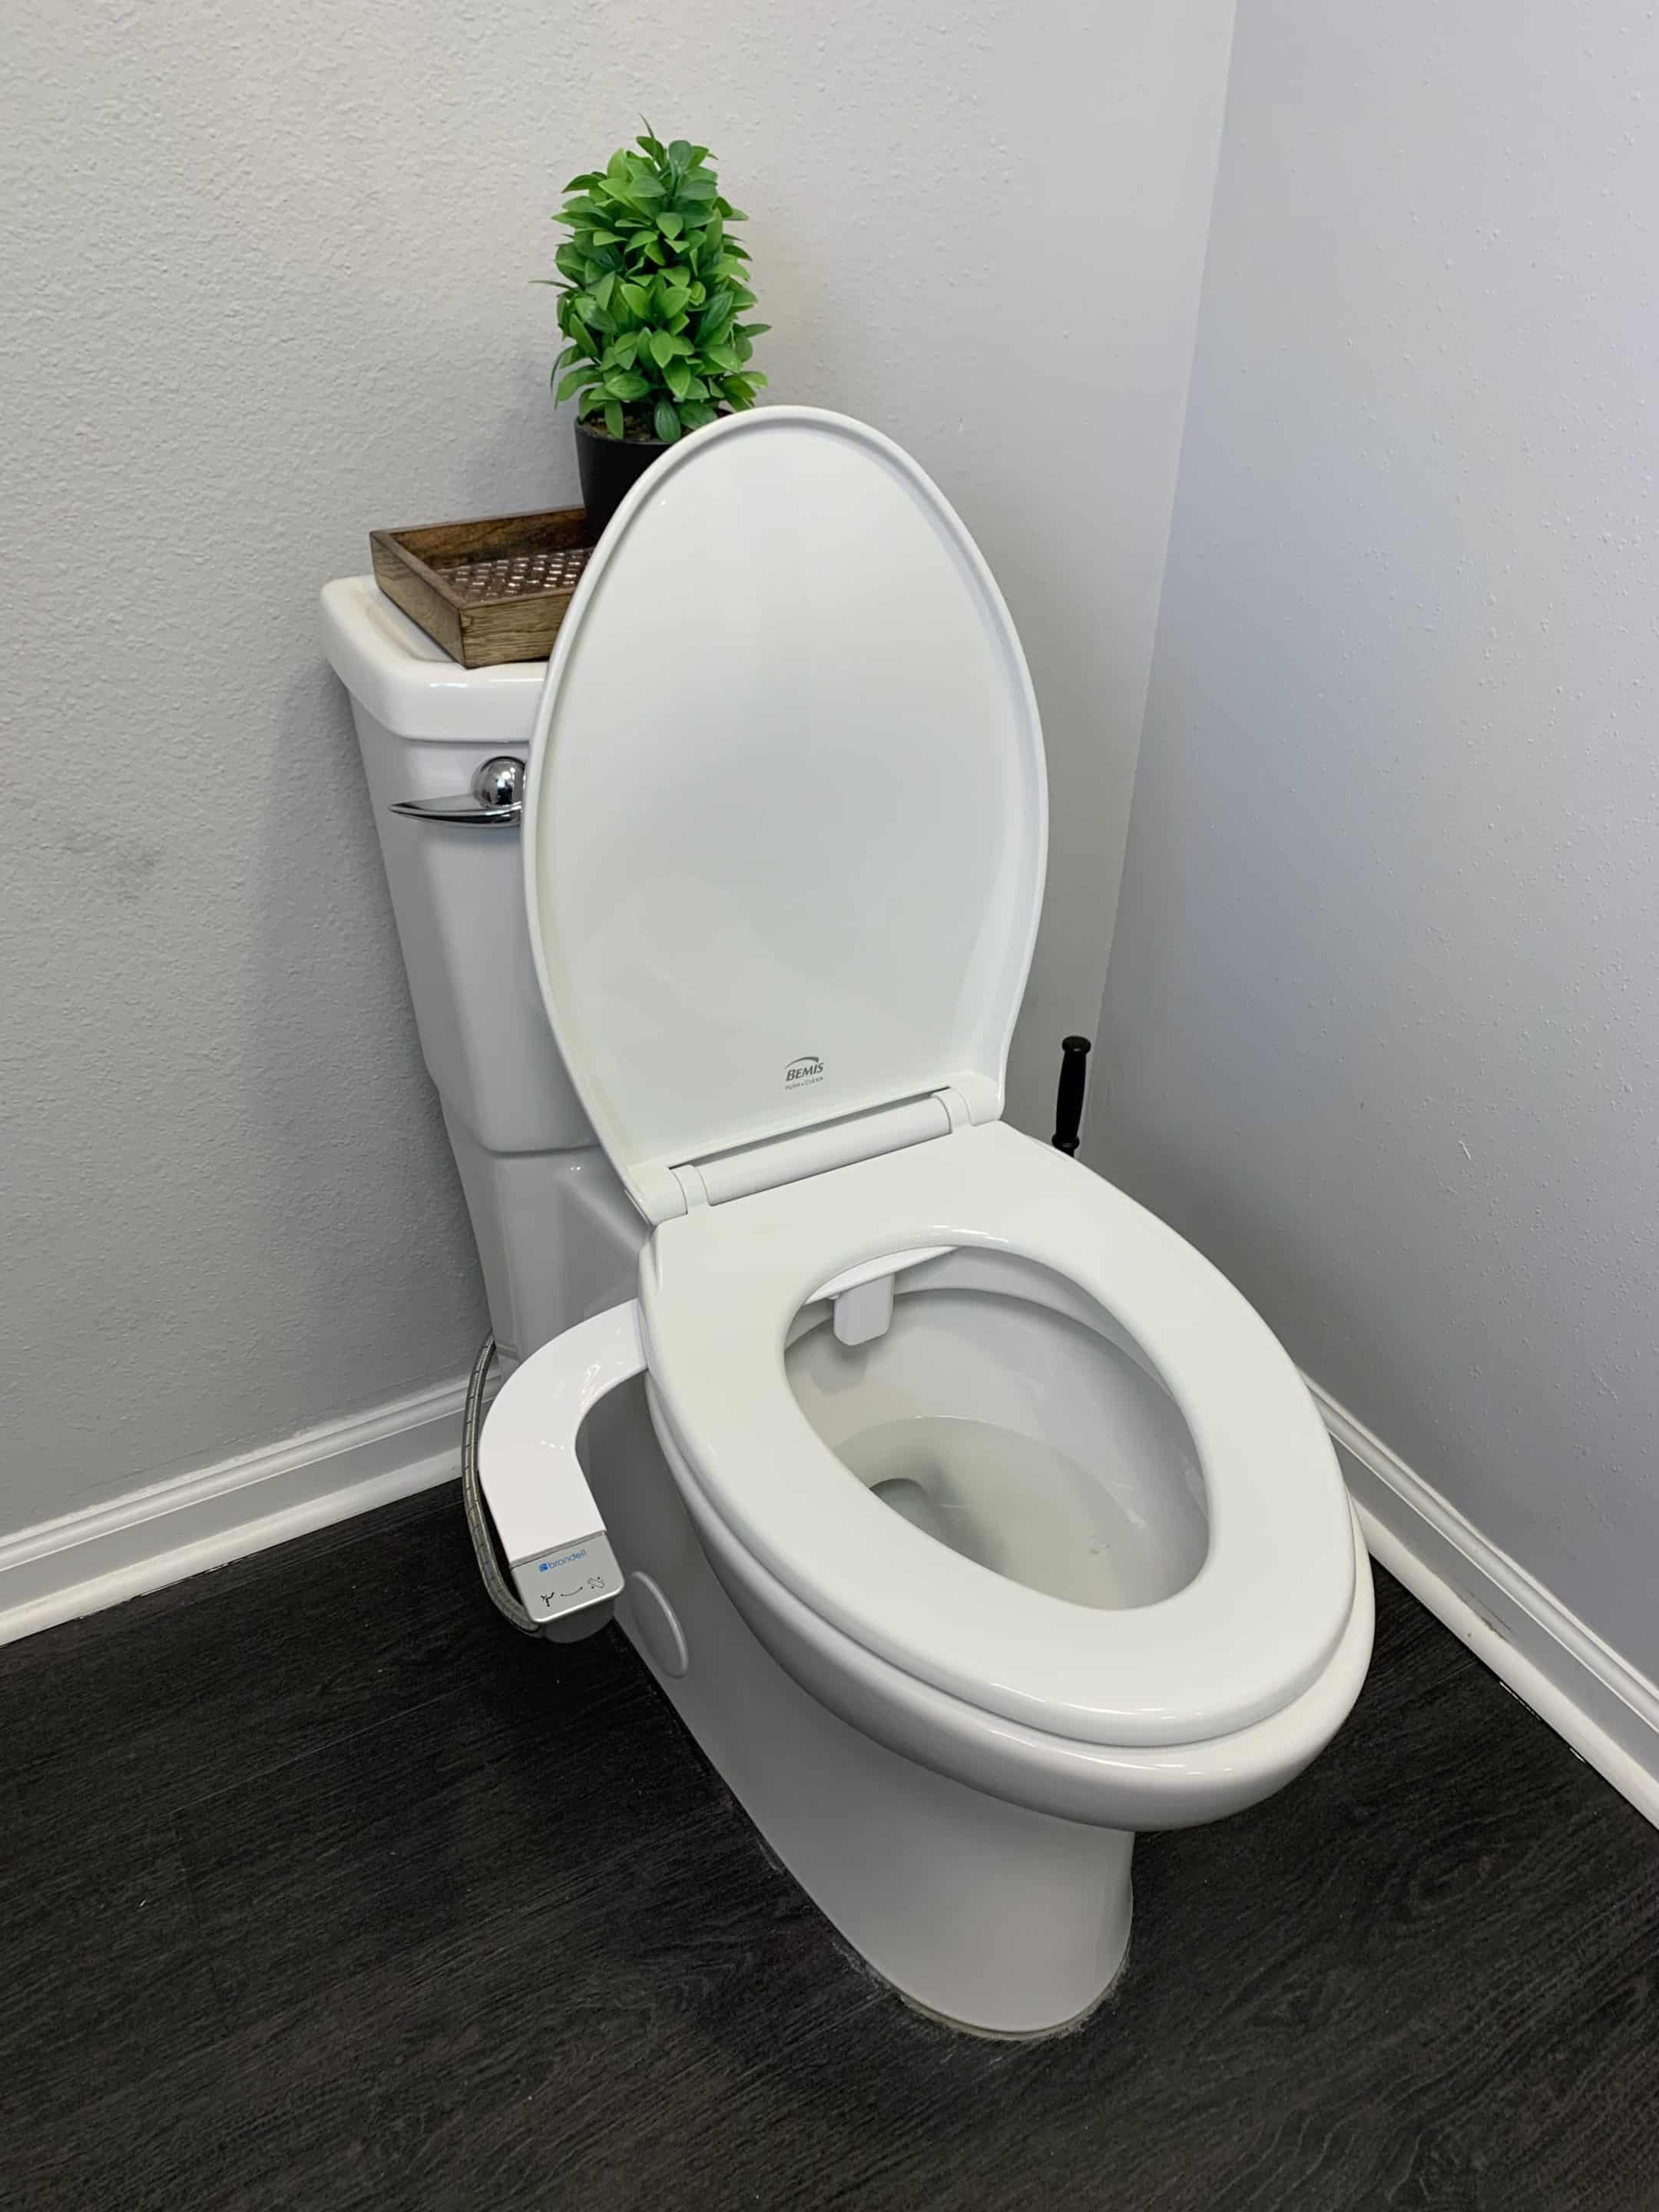 The Bidet Toilet Seat Attachment in the McManus Kitchen and Bath Showroom